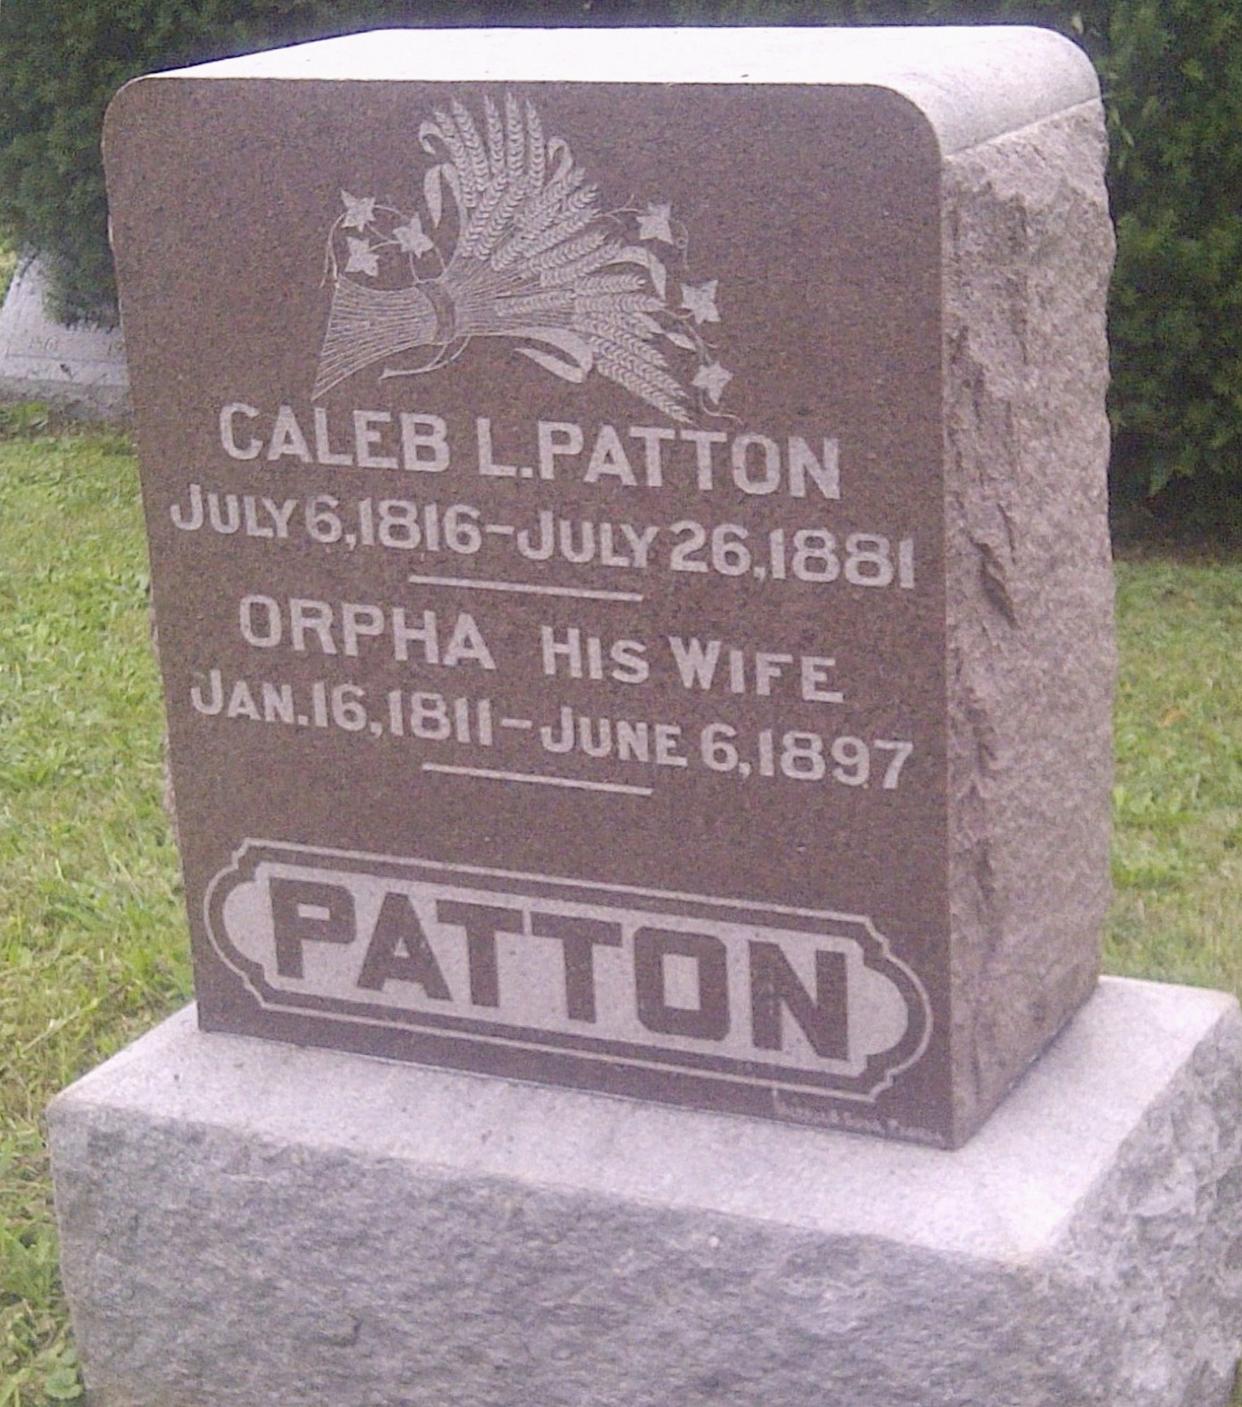 Gravestone for Caleb Patton, founder of Fairbury, in Graceland Cemetery.